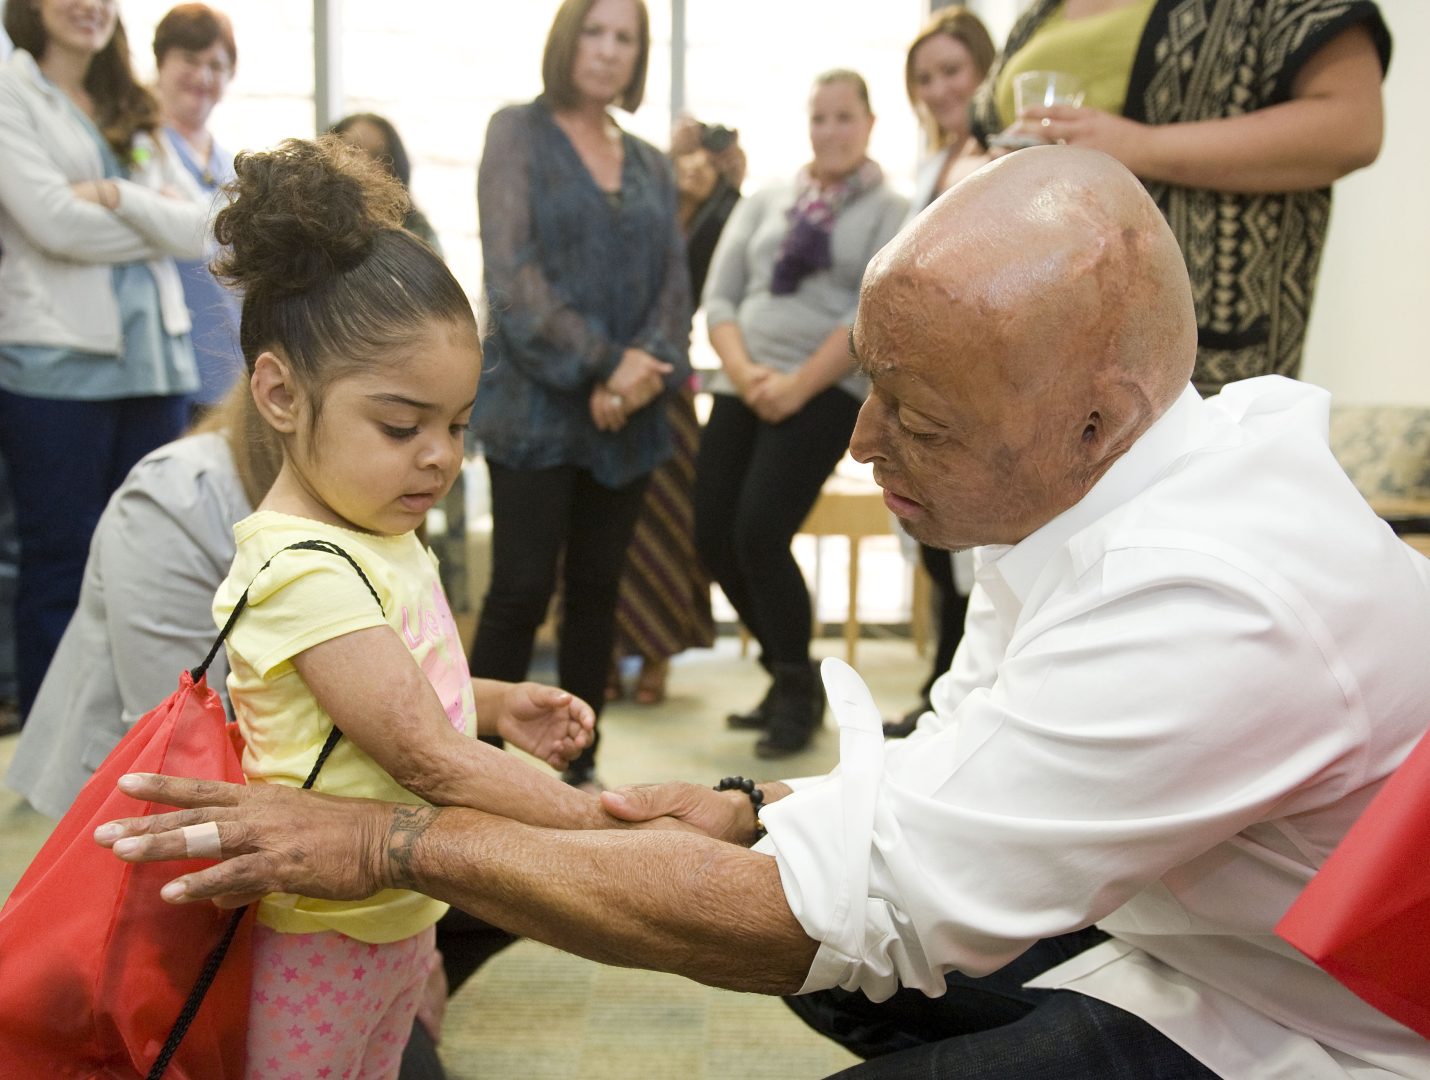 Burn survivor, Iraq war veteran and former Dancing With the Stars winner J.R. Martinez compares arms with fellow burn survivor Valentina Serrano, 2, of Compton, during a visit to the UC Irvine Health Regional Burn Center Wednesday afternoon. Martinez is representing the Phoenix Society for Burn Survivors, which brings together burn survivors, their families, caregivers, burn care professionals and firefighters to encourage the sharing of stories, support and knowledge of burn recovery.